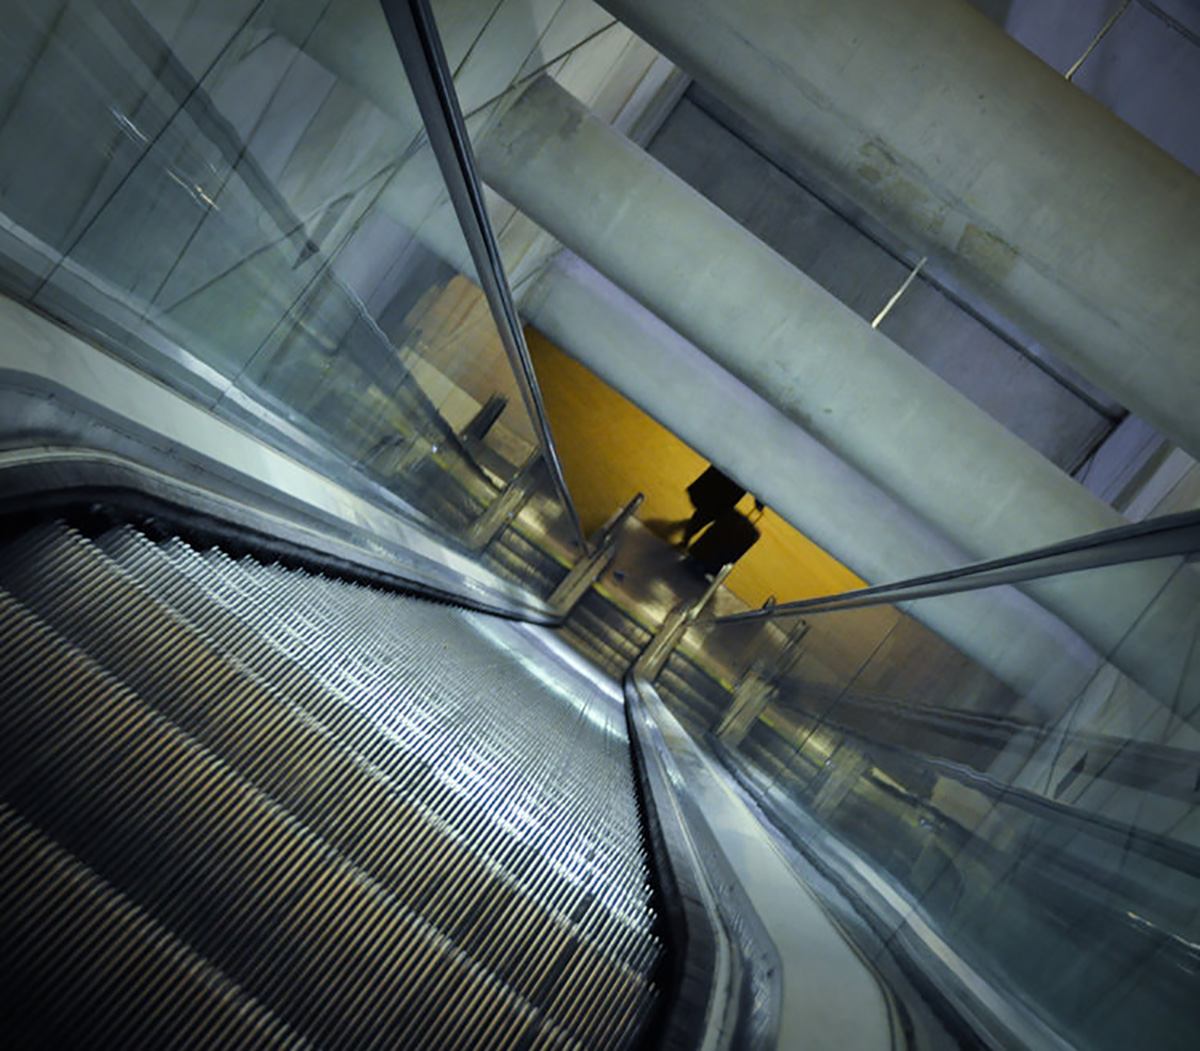 Photography and escalator architecture